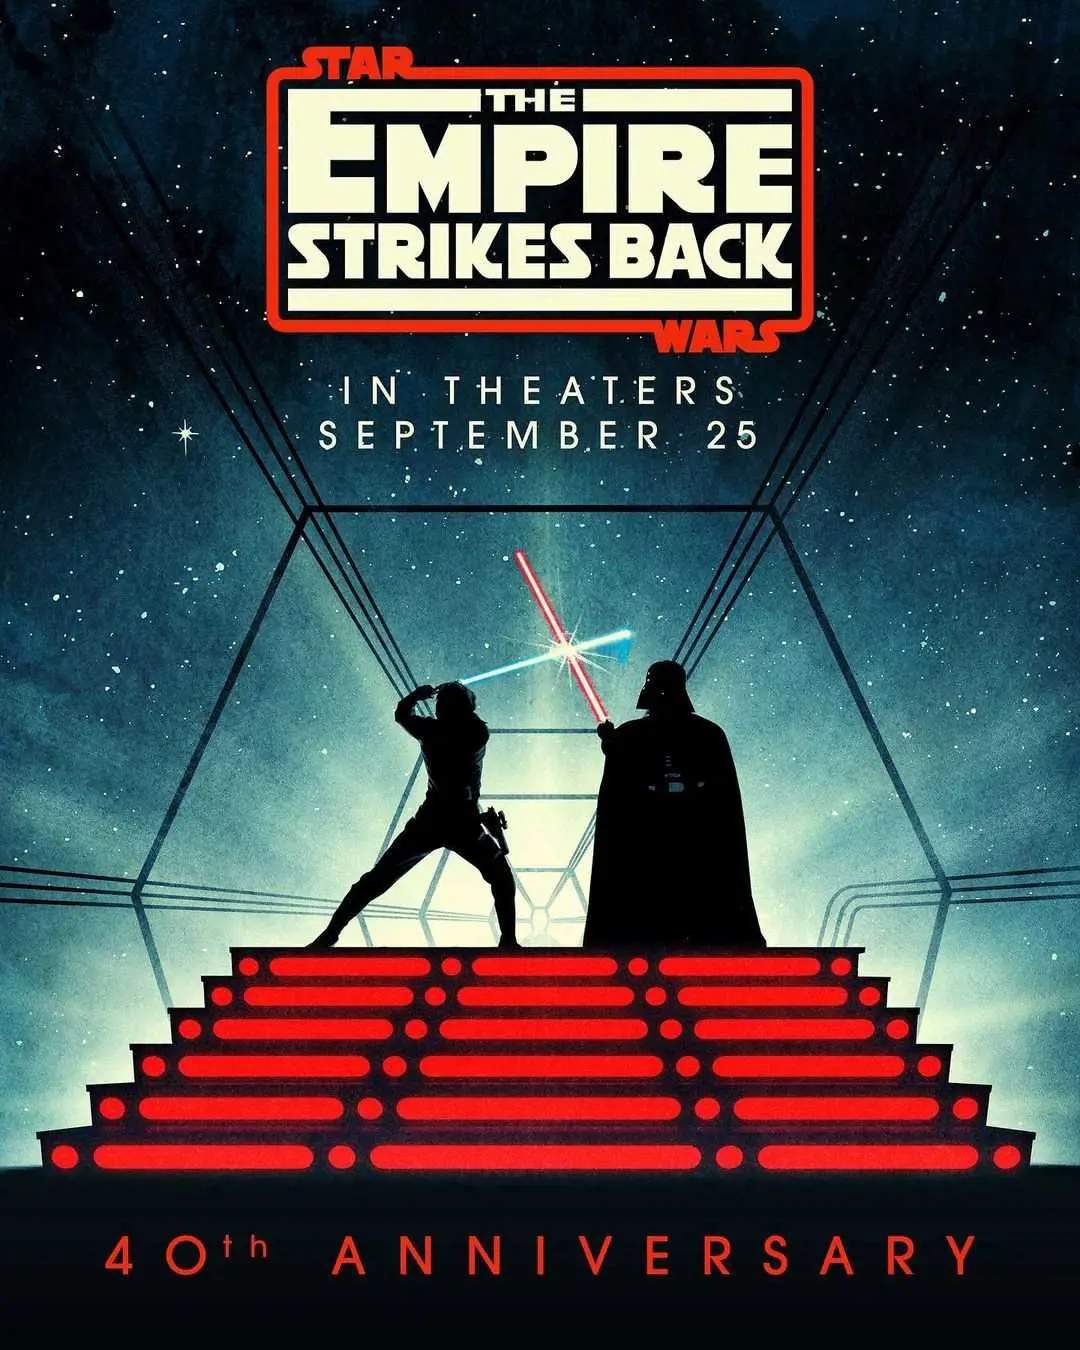 Star Wars - The Empire Strikes Back in theaters on September 25, 2020, celebrating the 40th anniversary